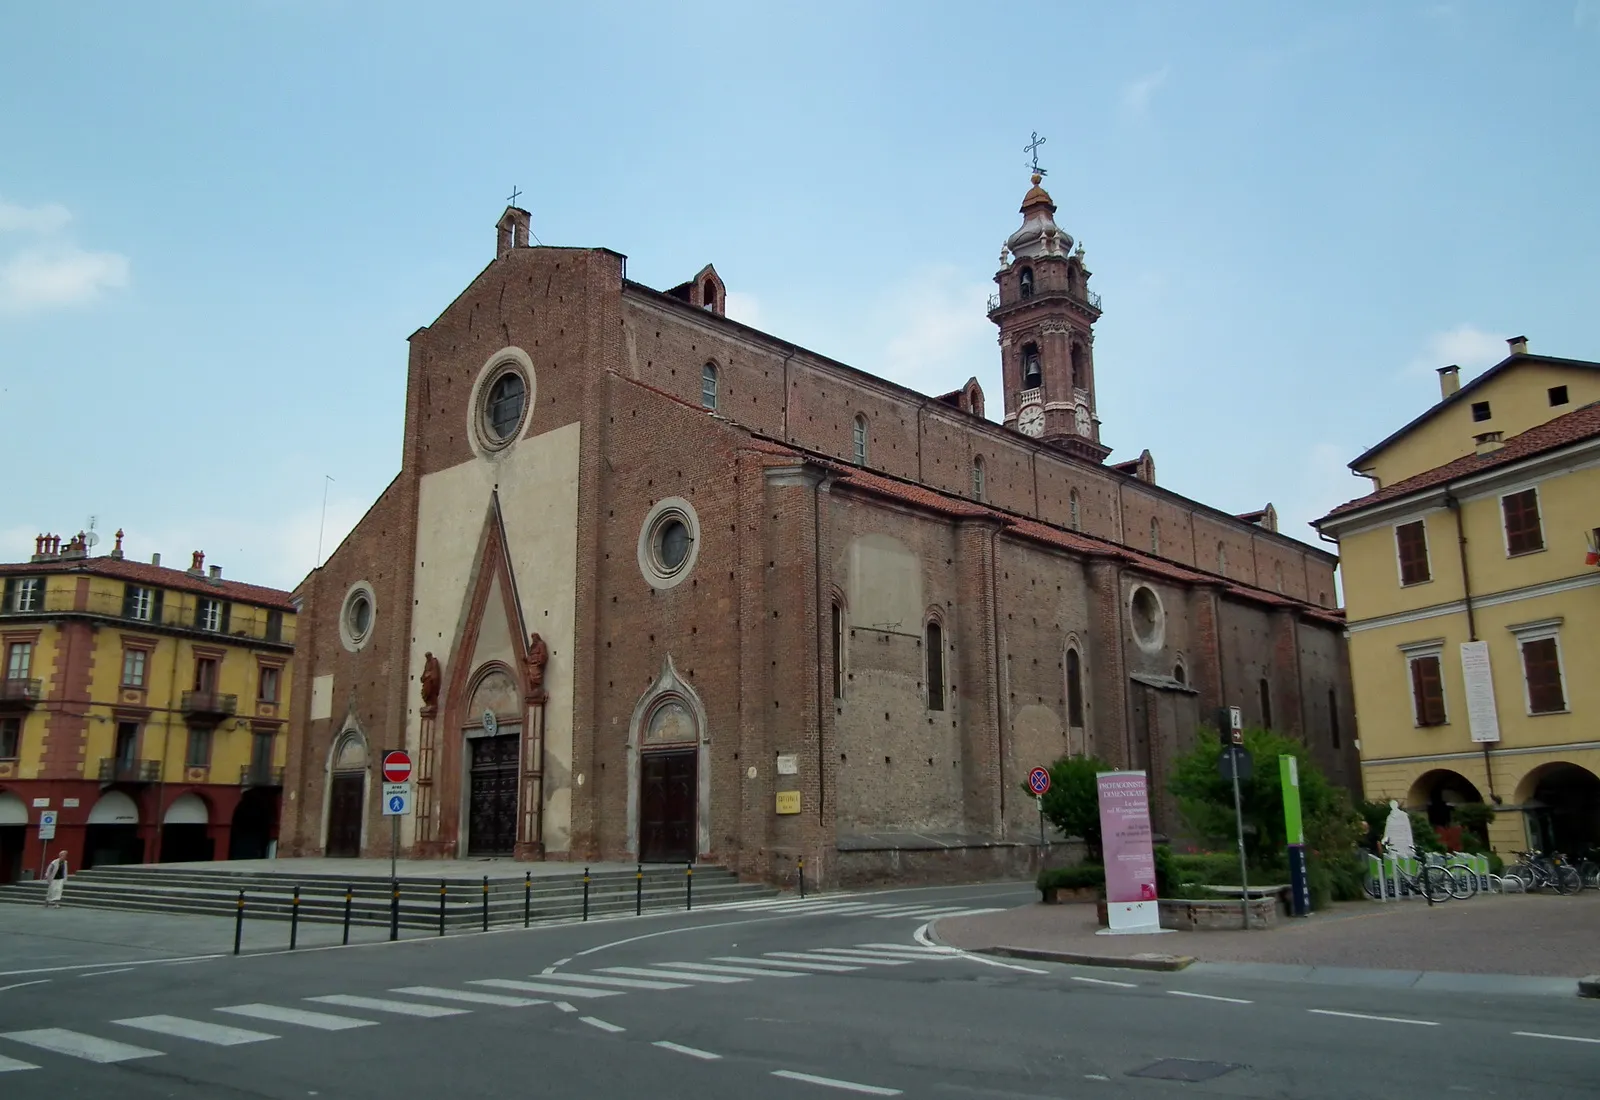 Photo showing: cathedral of Our Lady of the Assumption

Native name
Duomo di Saluzzo Location
Saluzzo, Piedmont, Italy Coordinates
44° 38′ 41.32″ N, 7° 29′ 35.34″ E Established
1491 Authority file

: Q2942780
VIAF: 123620076
LCCN: nr98023956
WorldCat
institution QS:P195,Q2942780